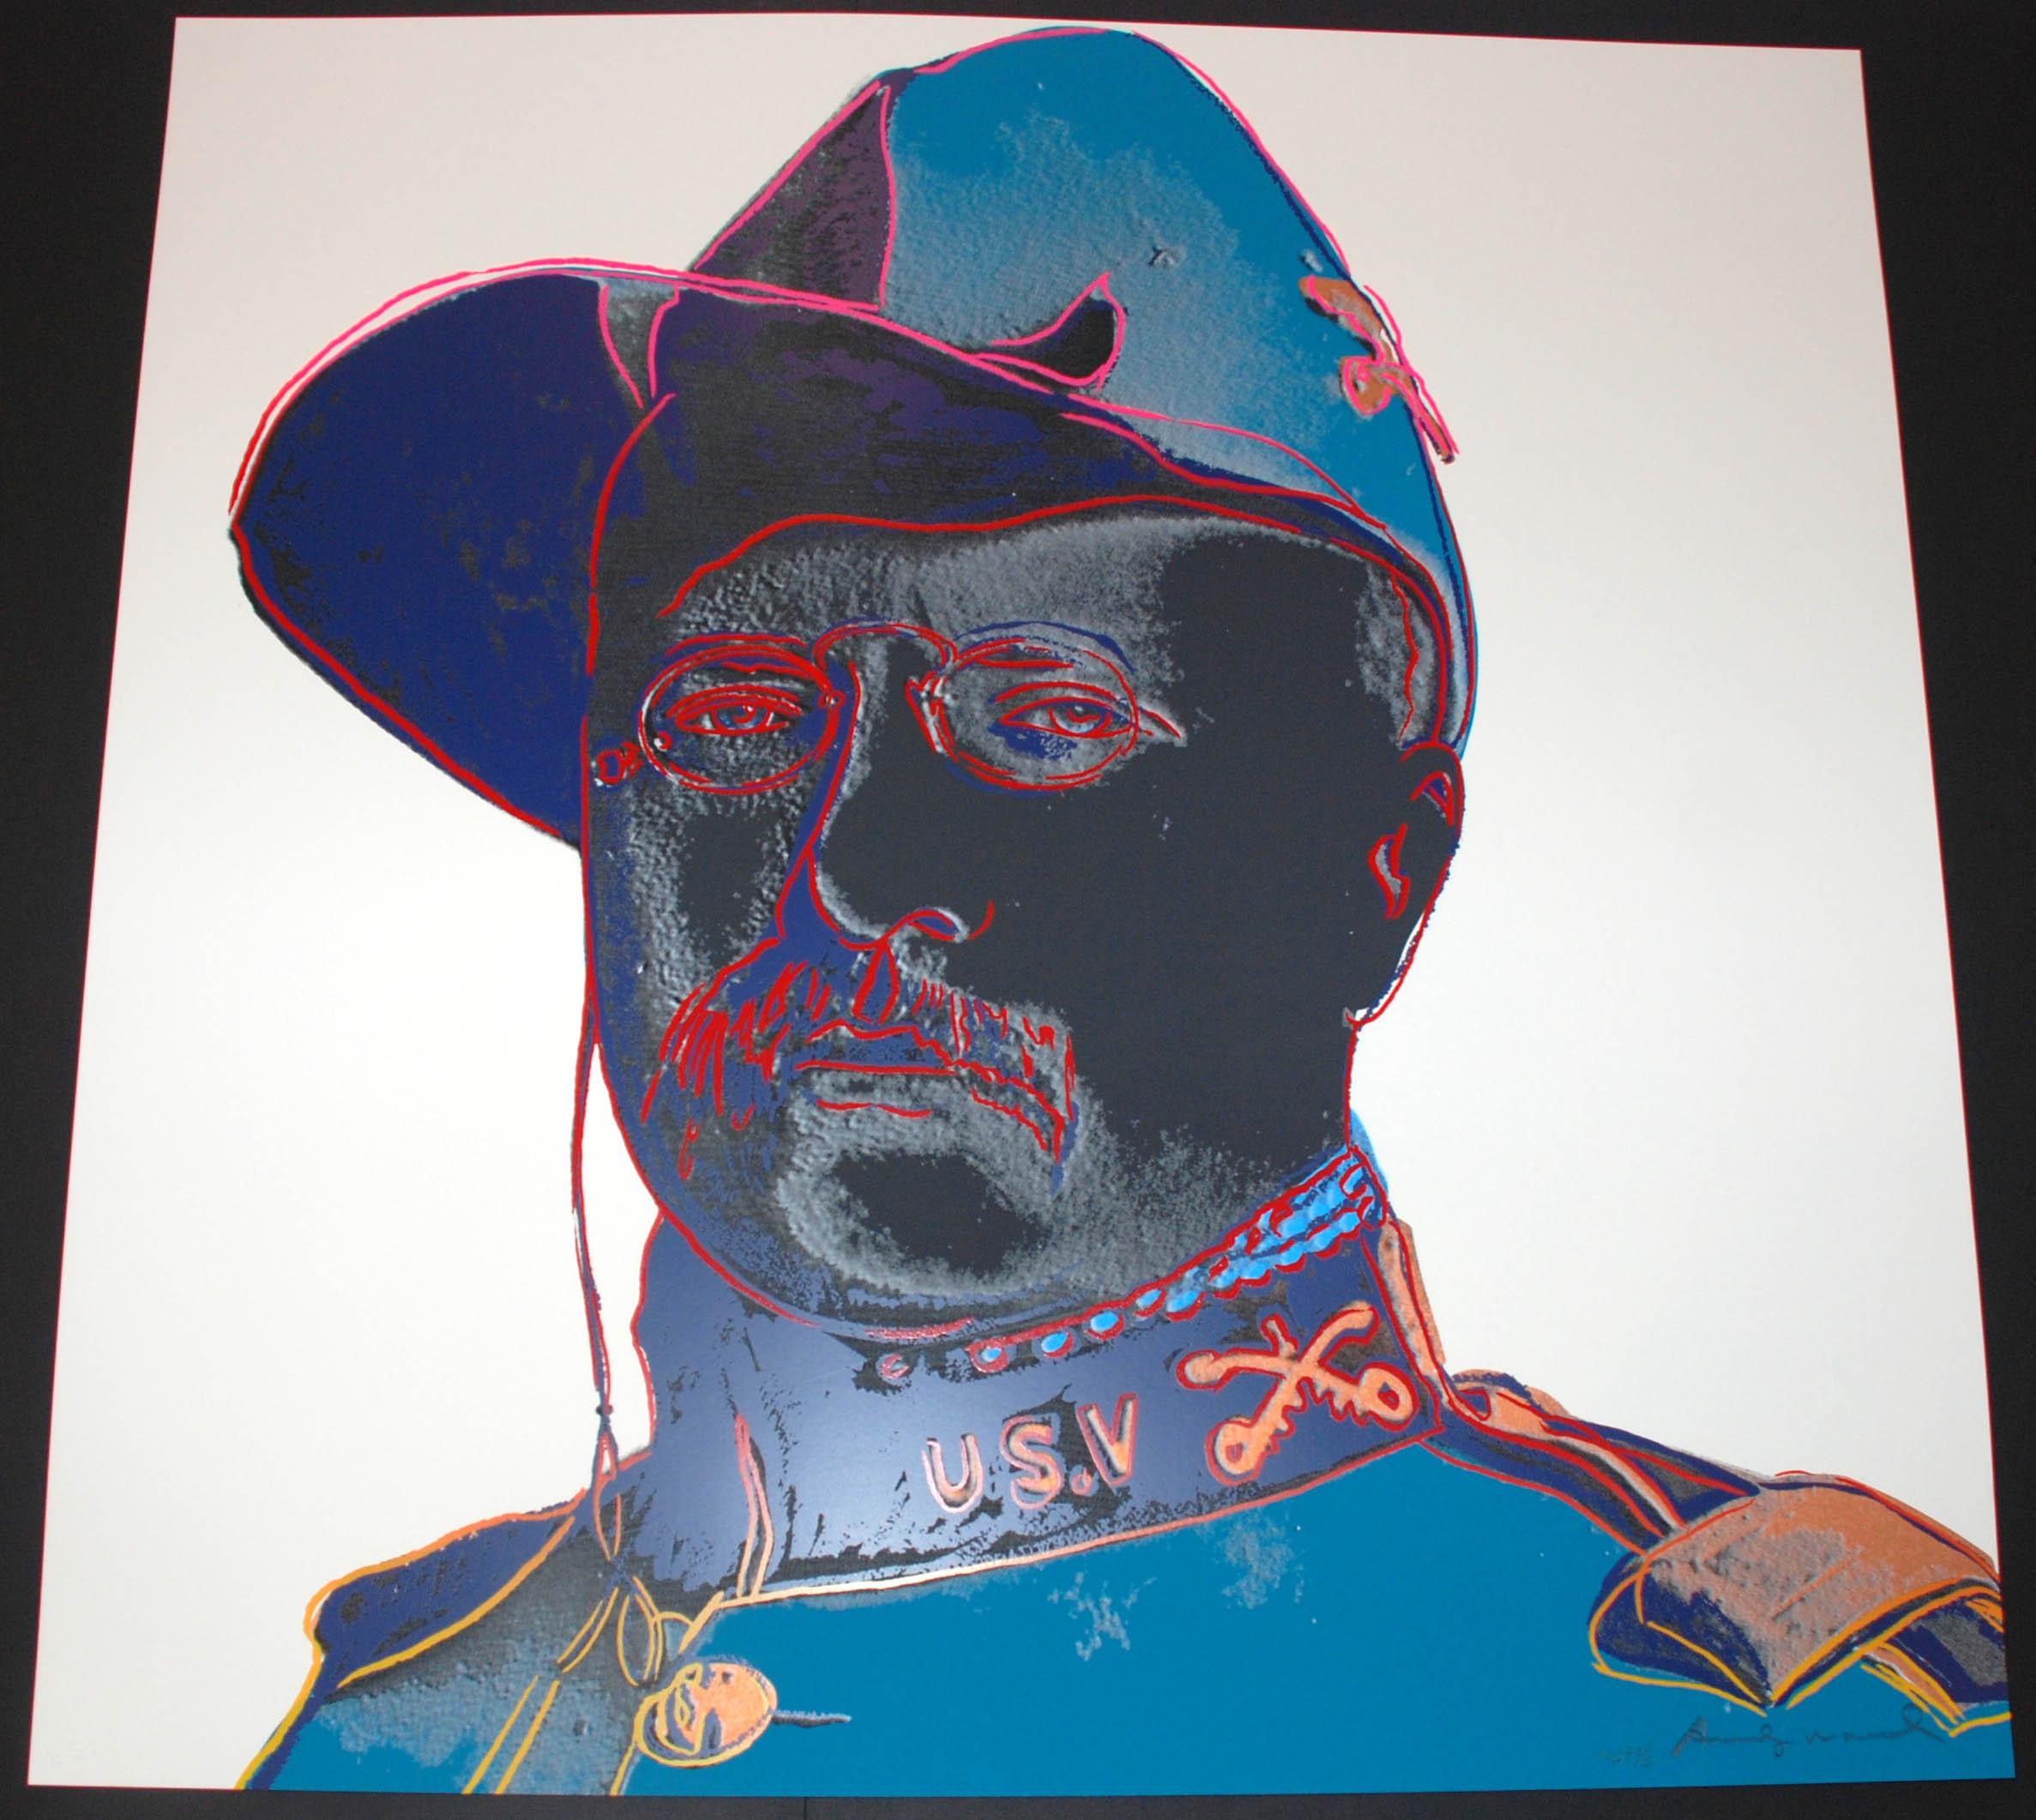 Teddy Roosevelt - Print by Andy Warhol